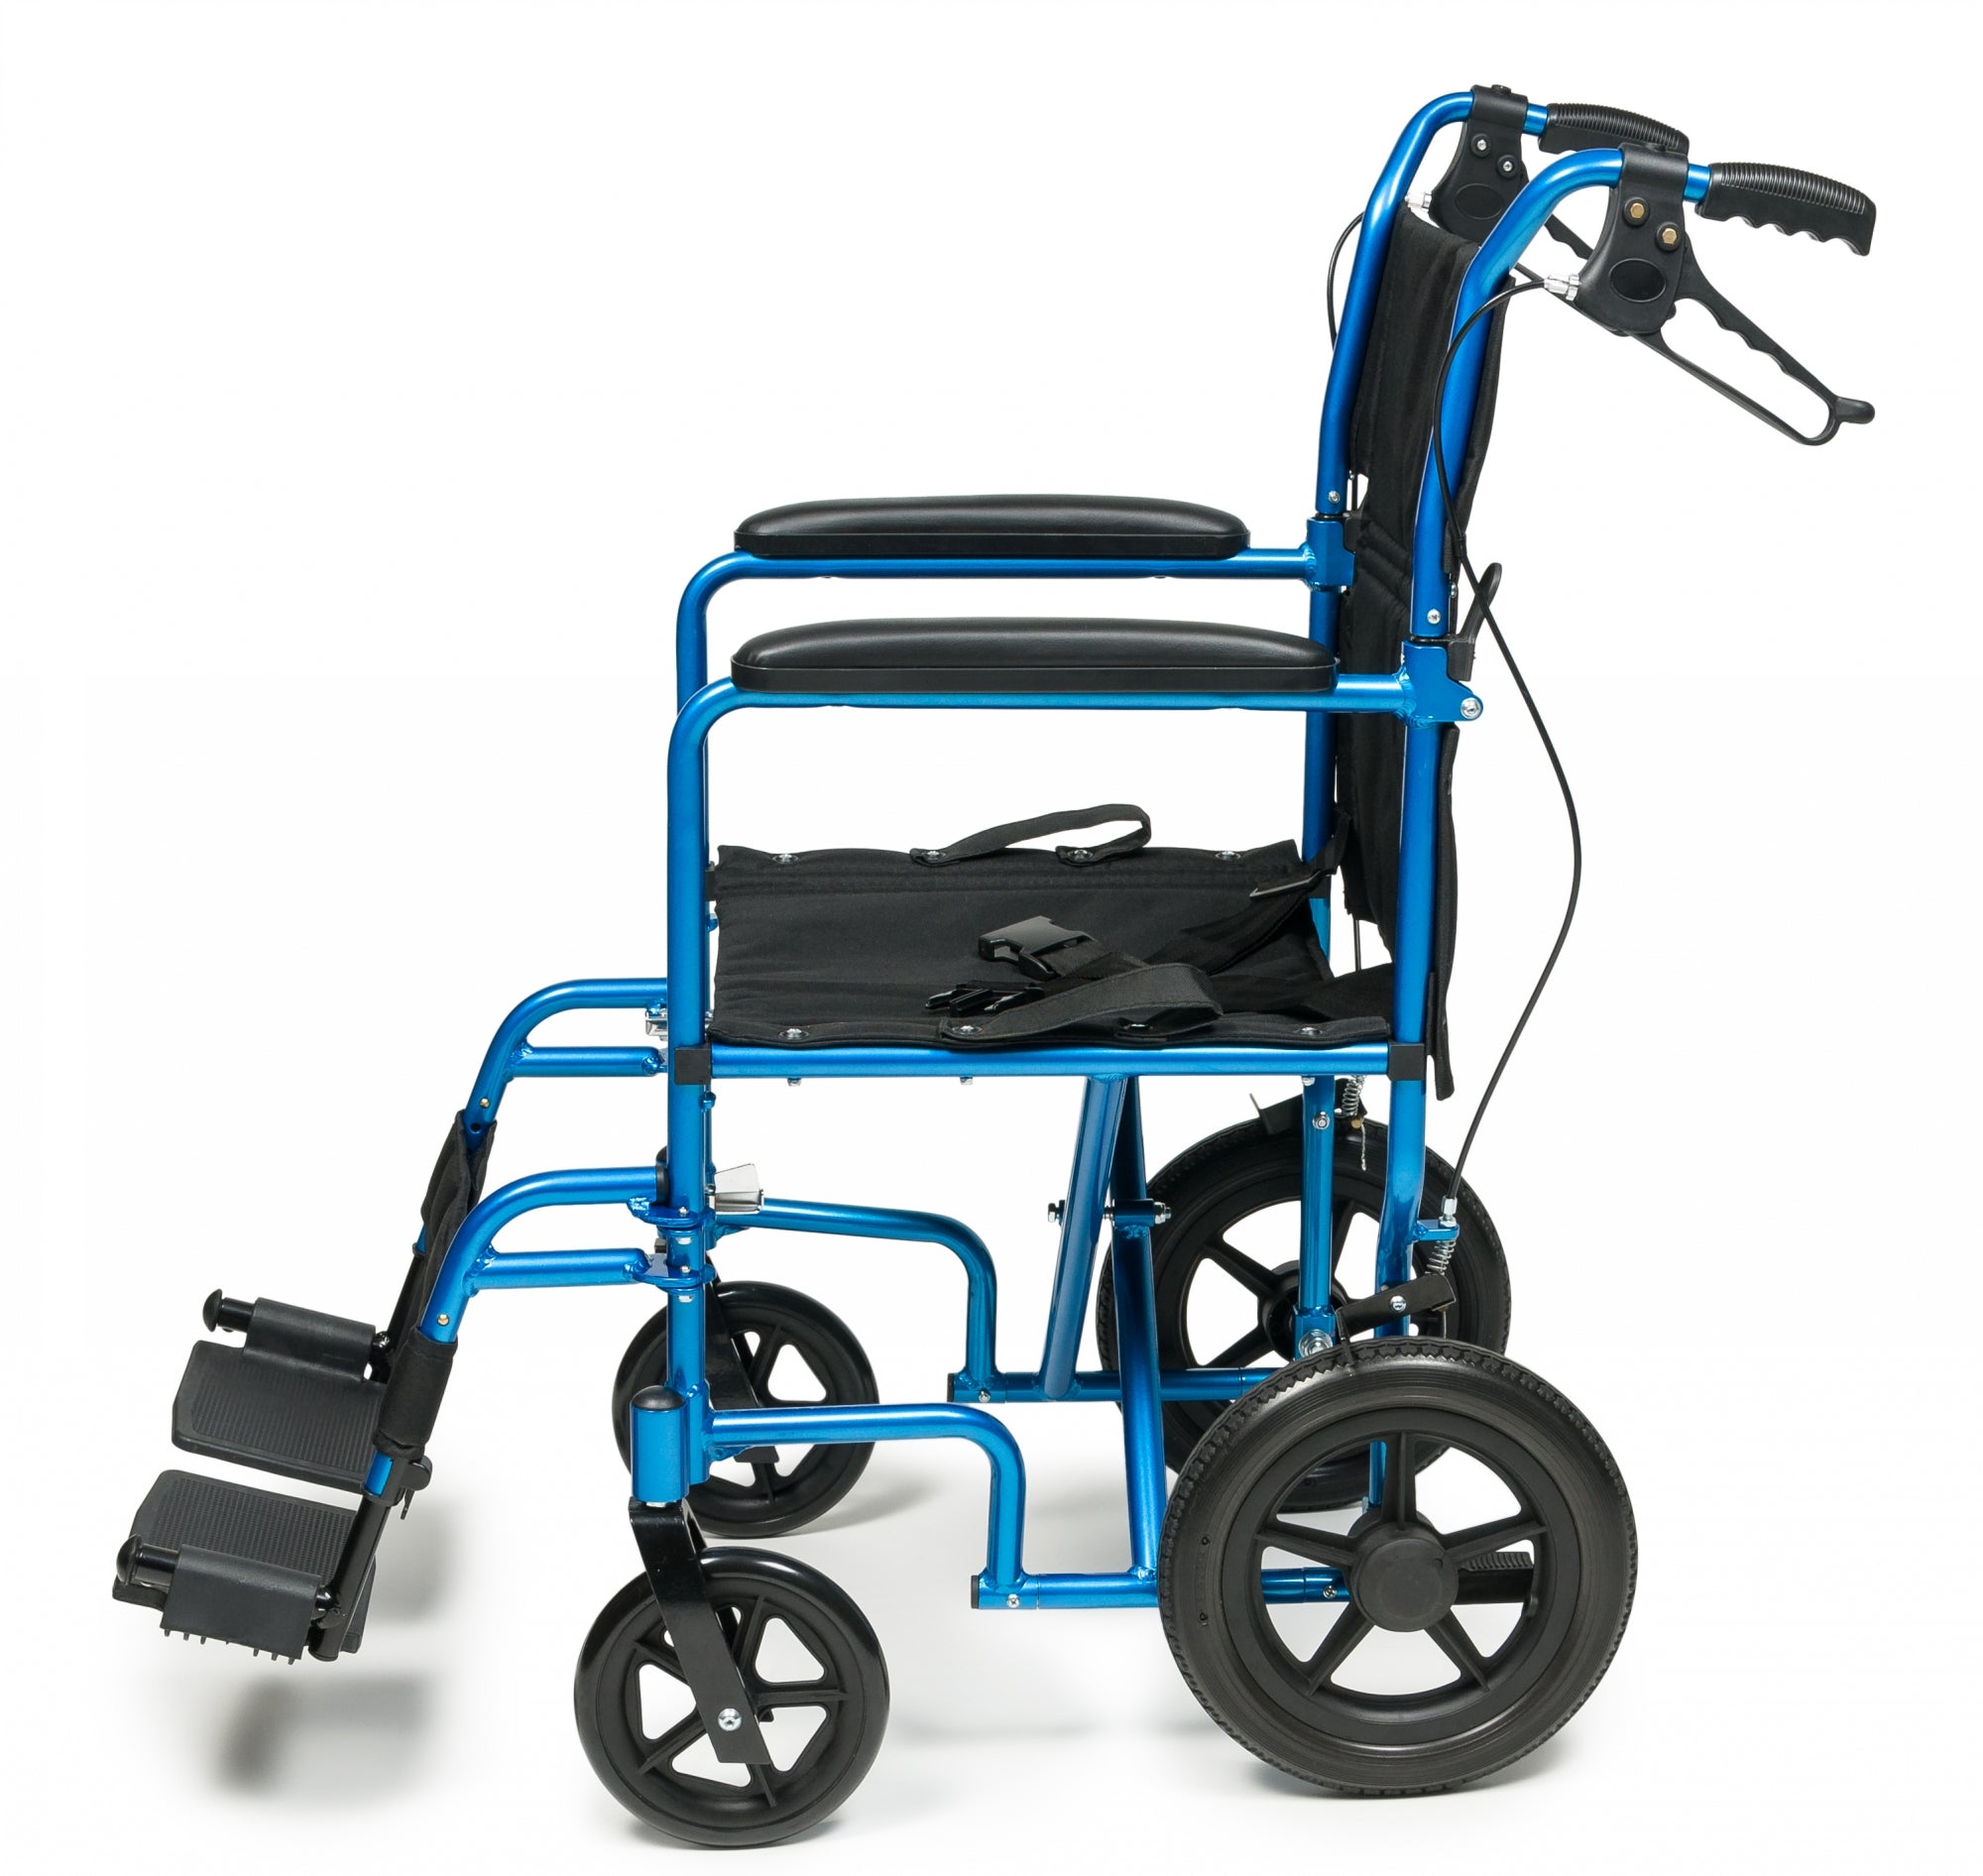 Deluxe Aluminum Transport Chair with 12 inch Wheels